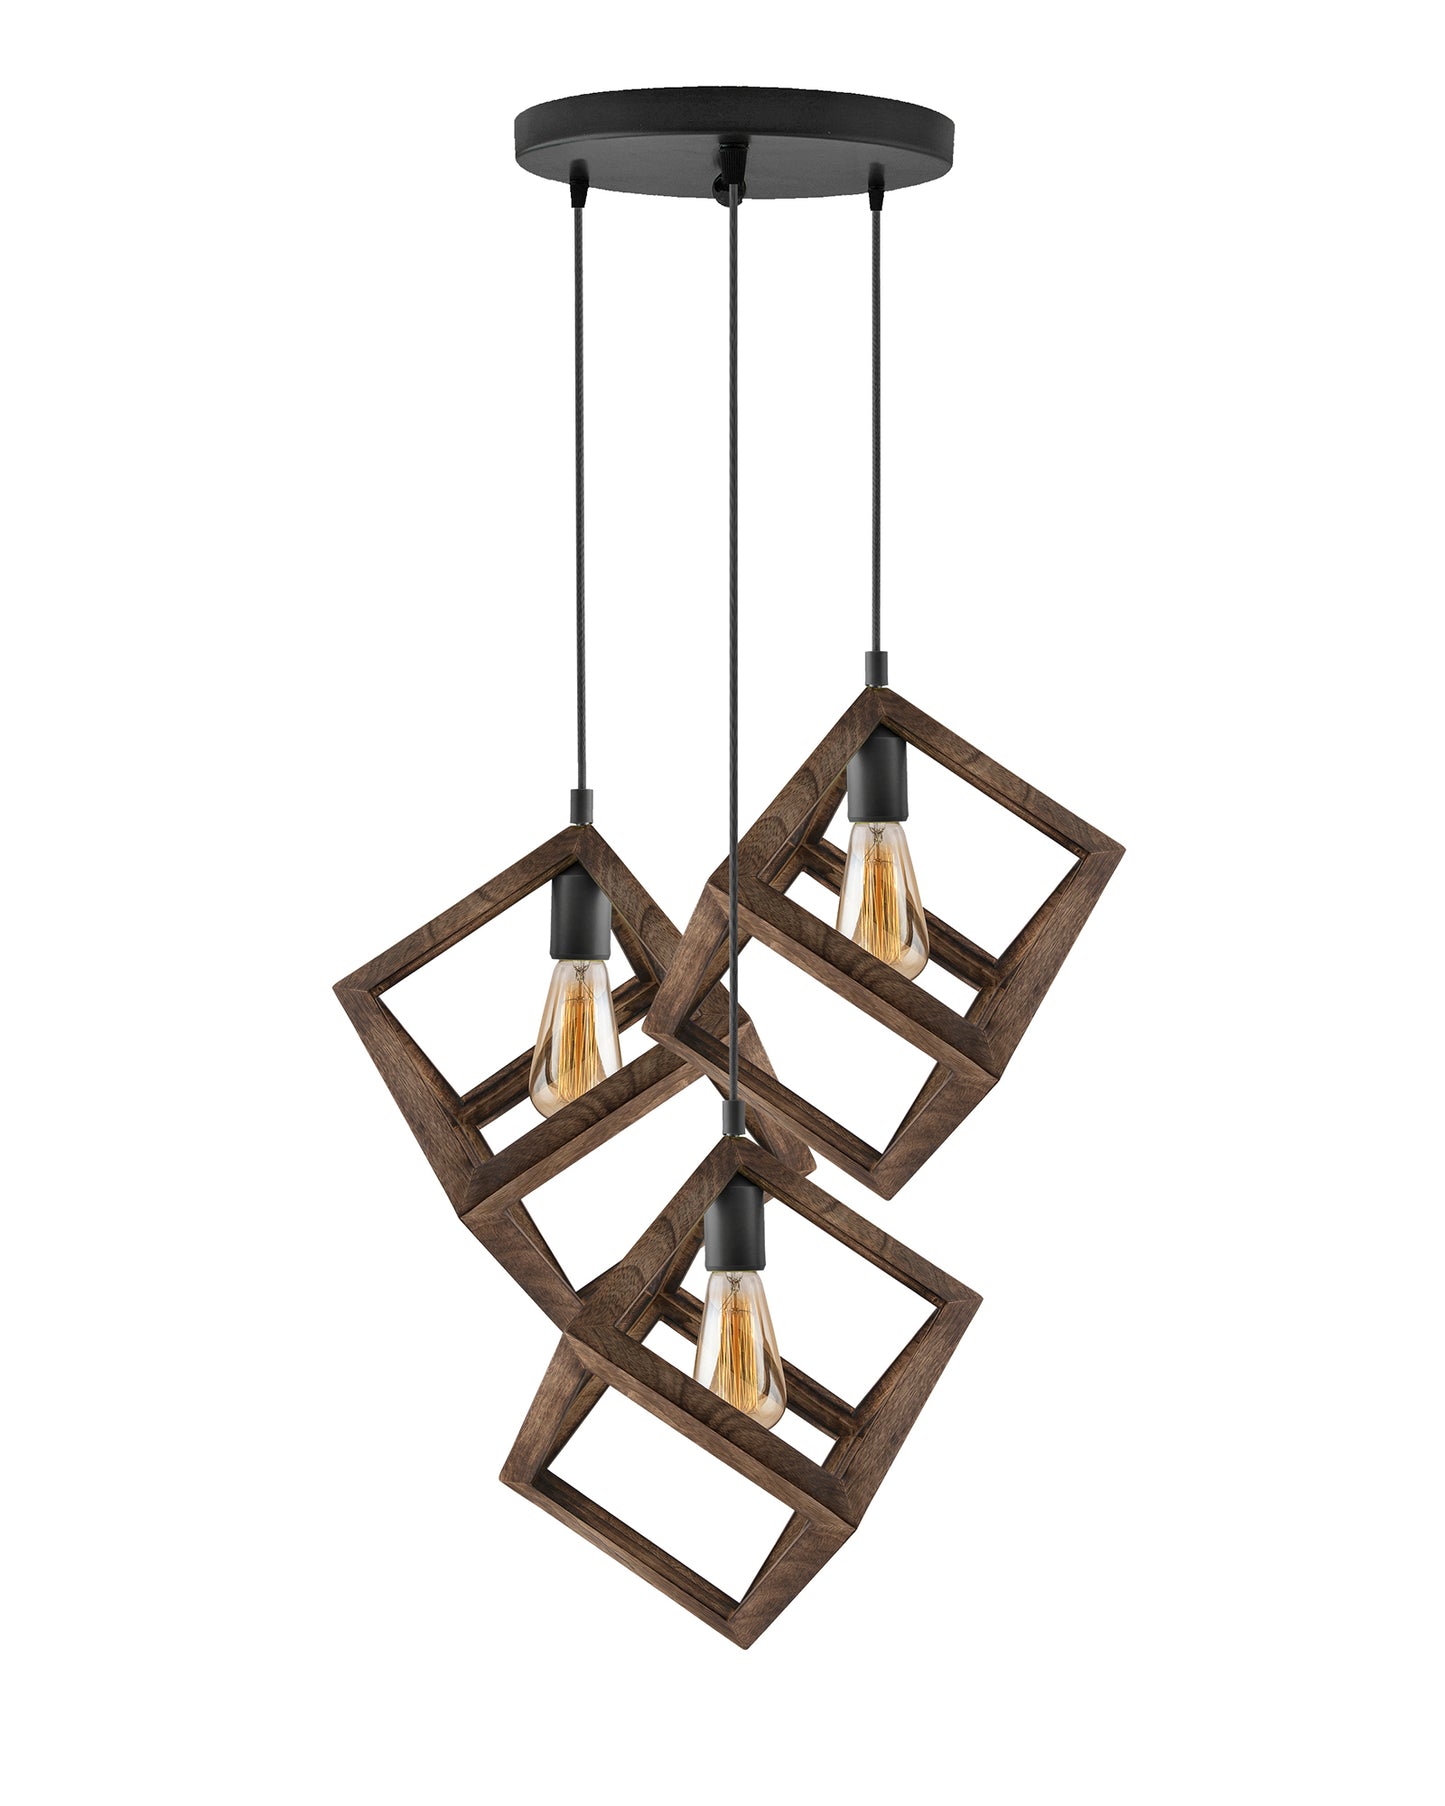 3-Lights Round Cluster Chandelier Modern Nordic Walnut Finish Wooden Pendant Cube Light with Silicone Holder, URBAN Retro, Nordic Style, LED/Filament Bulb